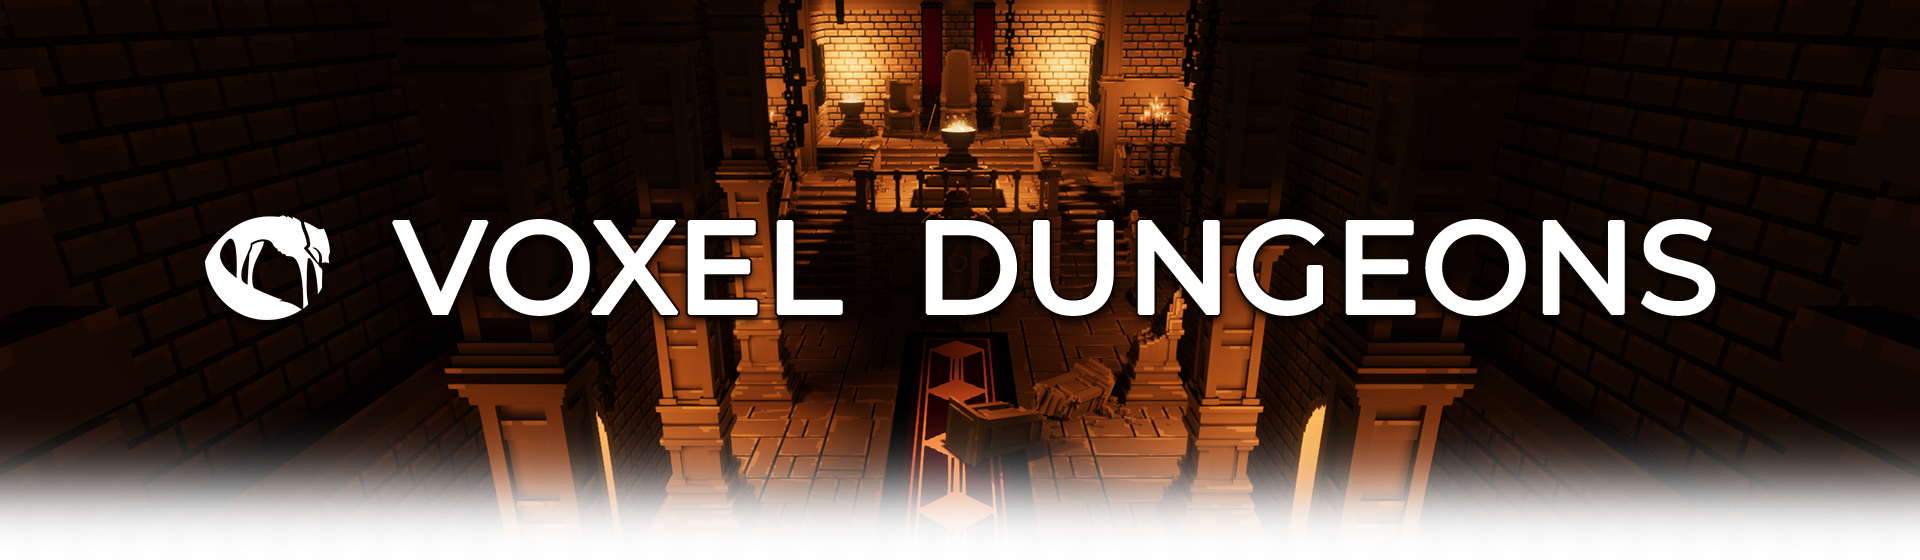 Voxel - Dungeons